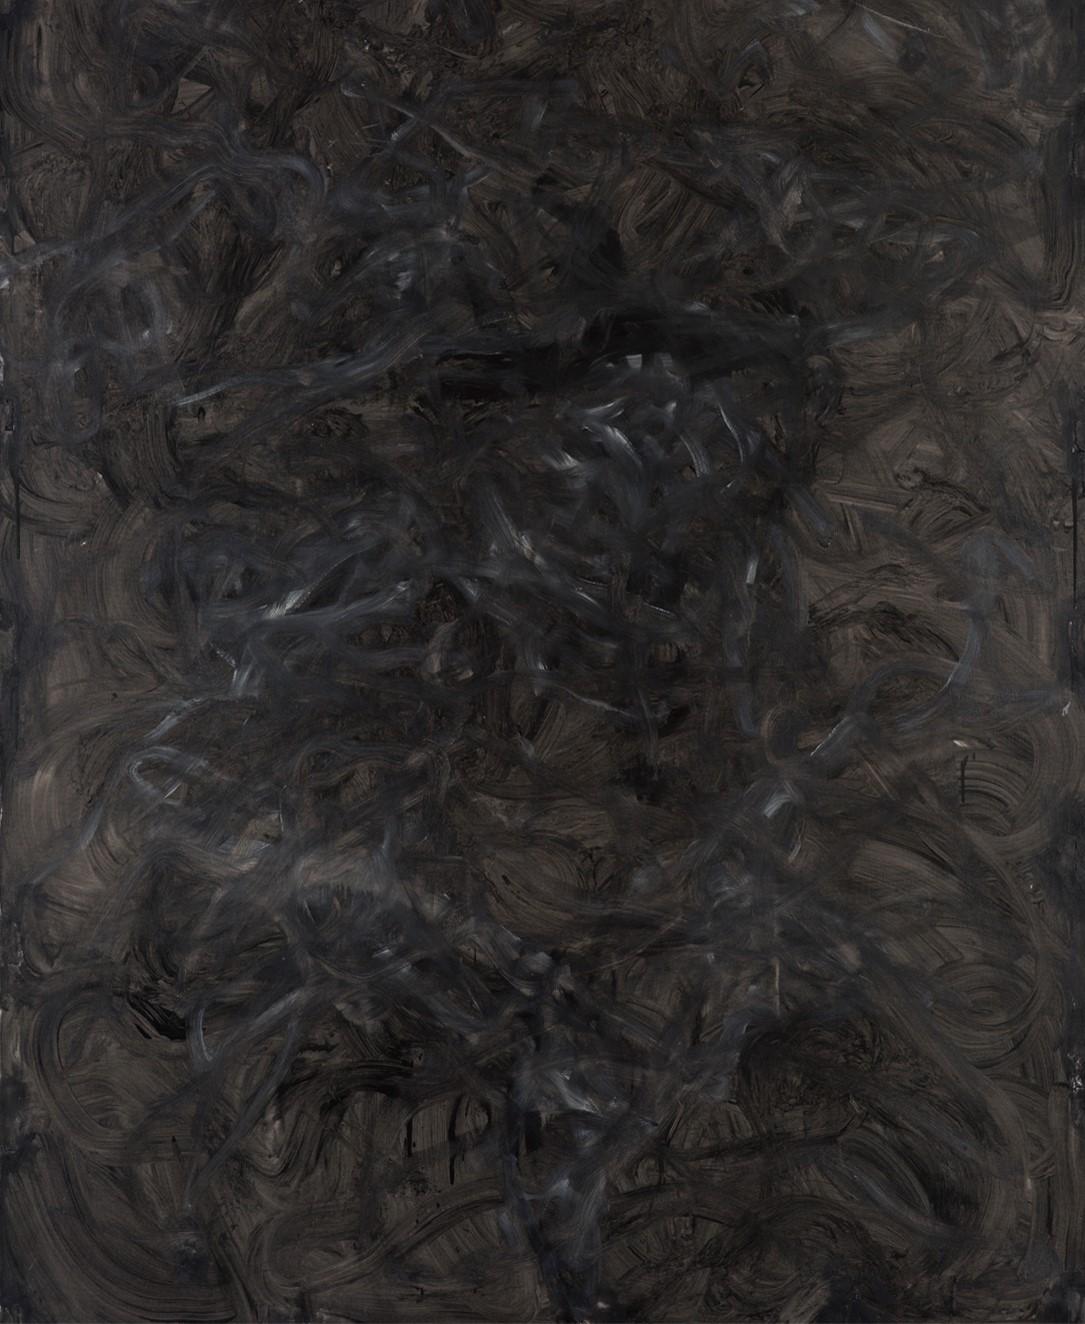 Untitled 019 [Remains of the Remains 019], 2019
oil on canvas
78 47/64 H x 55 1/8 W in
200 H x 140 W cm

The large-sized paintings, signed by Zsolt Berszán, addresses the subject of death in terms of the remains of decaying bodies. The surface of